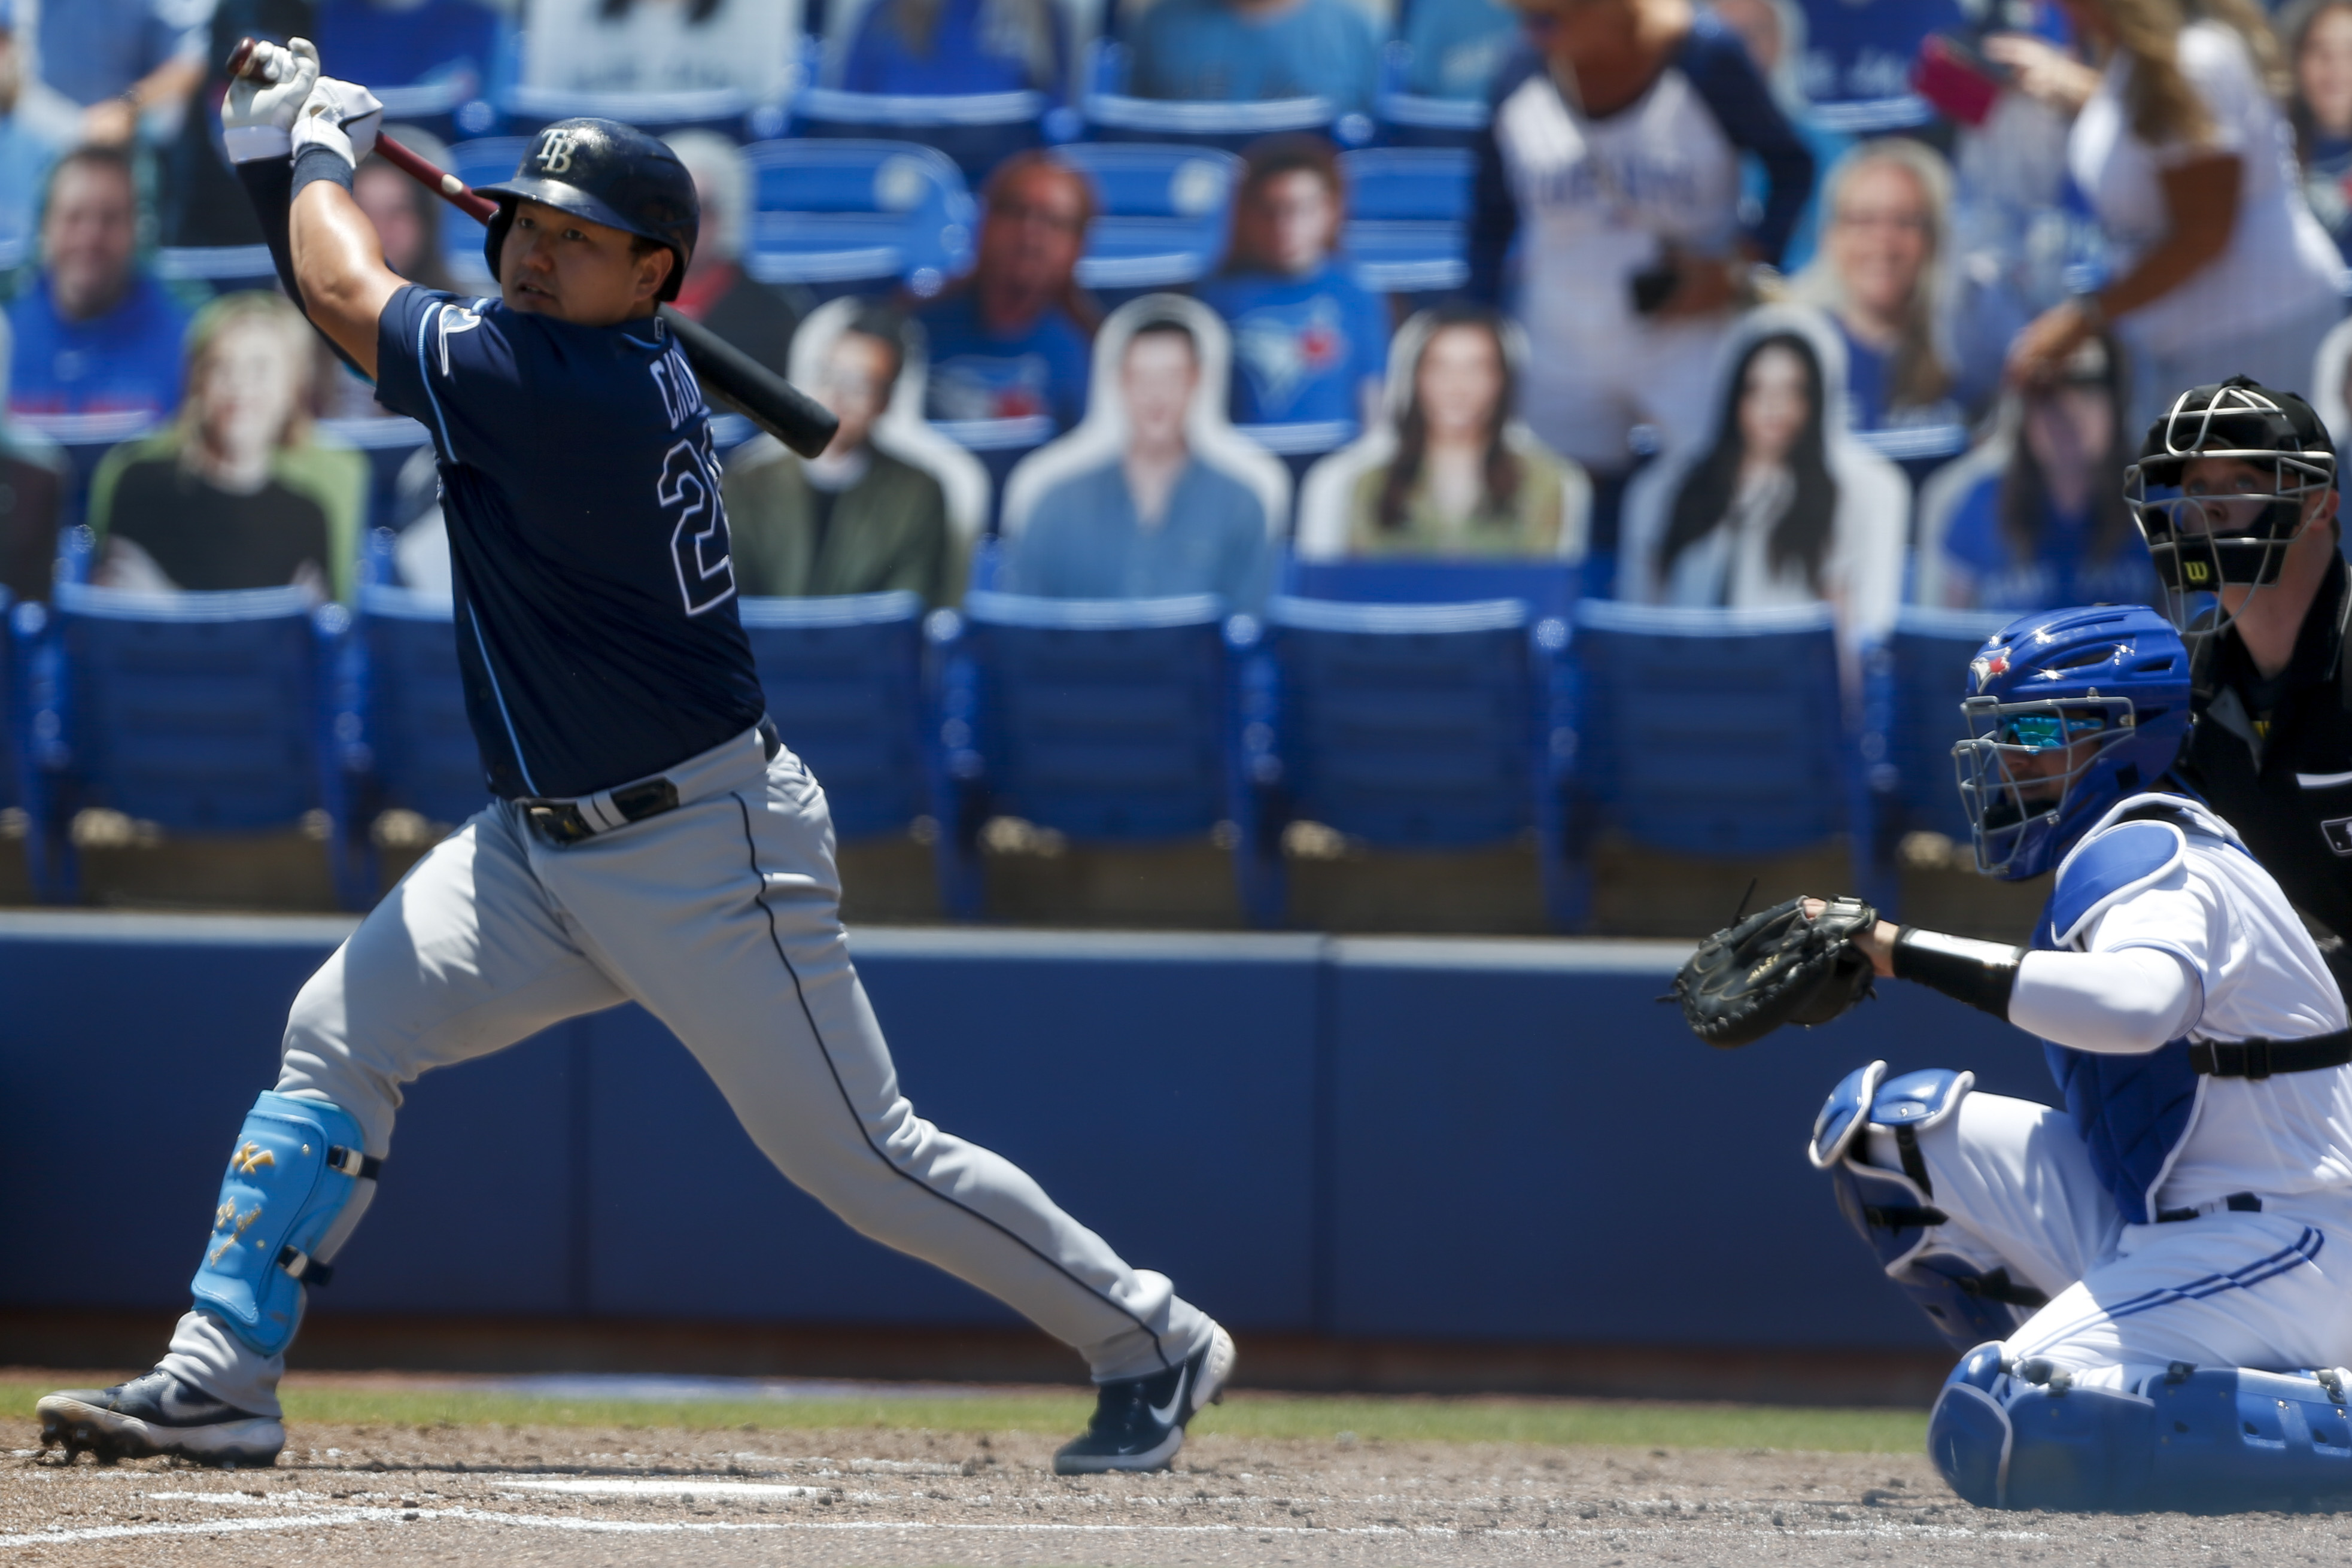 Rays report: Ji-Man Choi out for rest of regular season